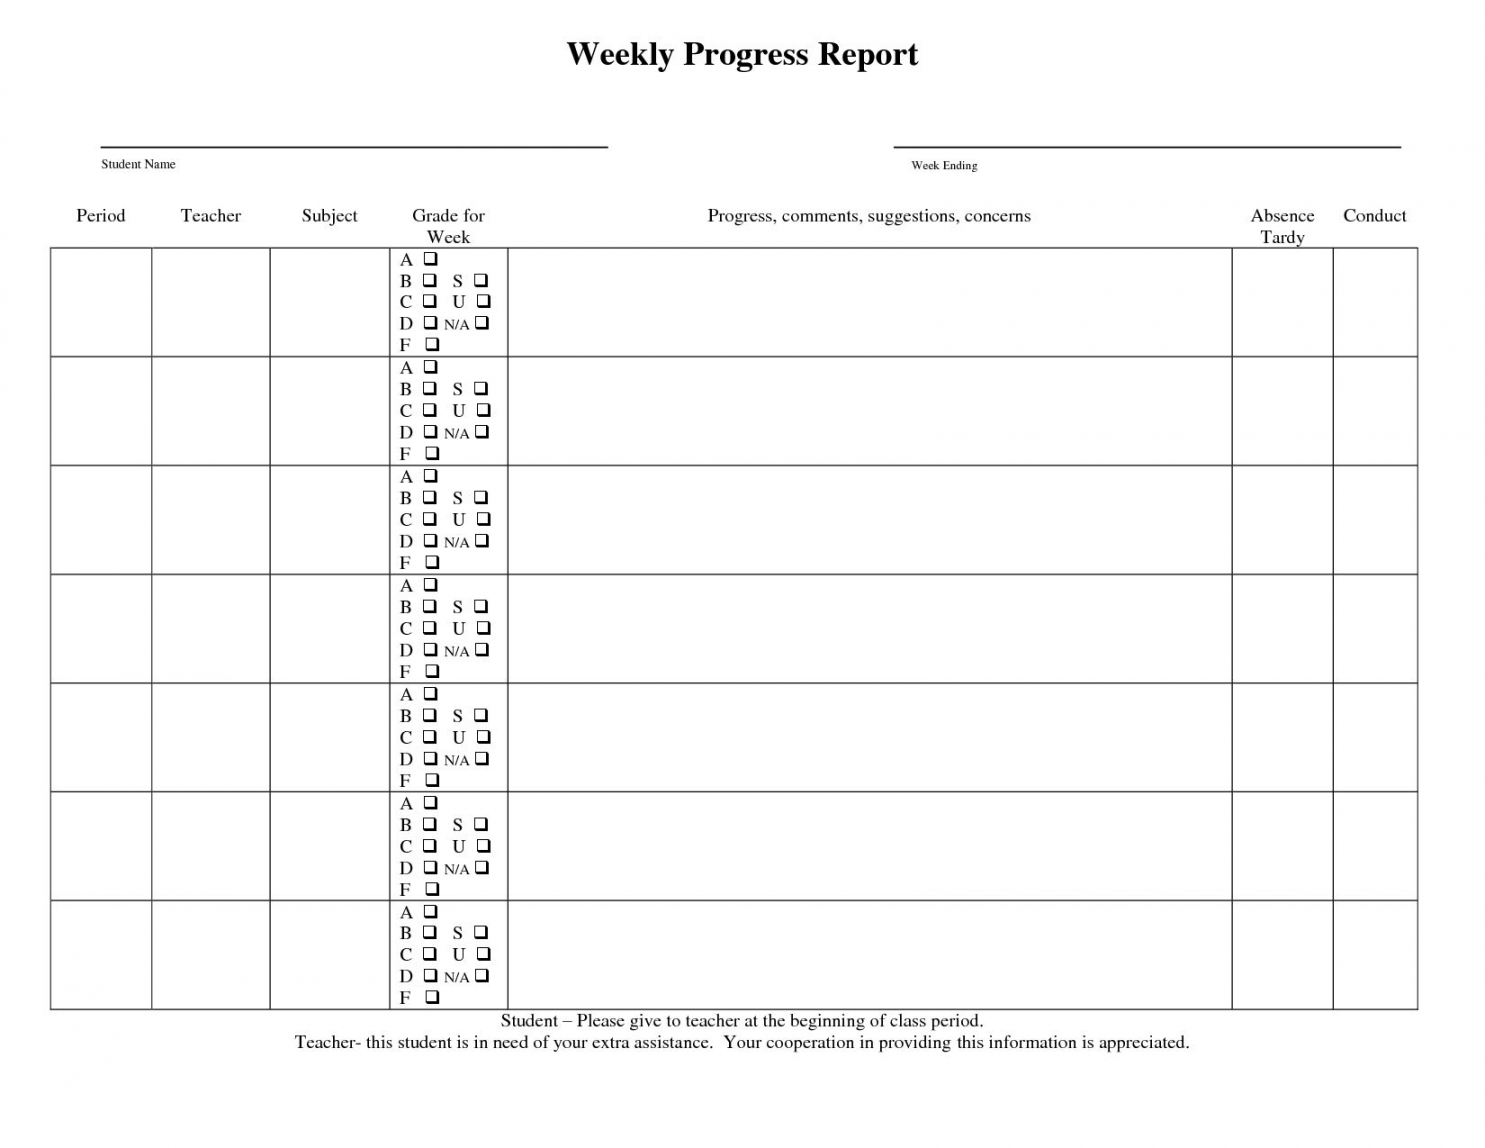 Daily Progress Report Format Excel Construction Glendale Pertaining To Student Progress Report Template